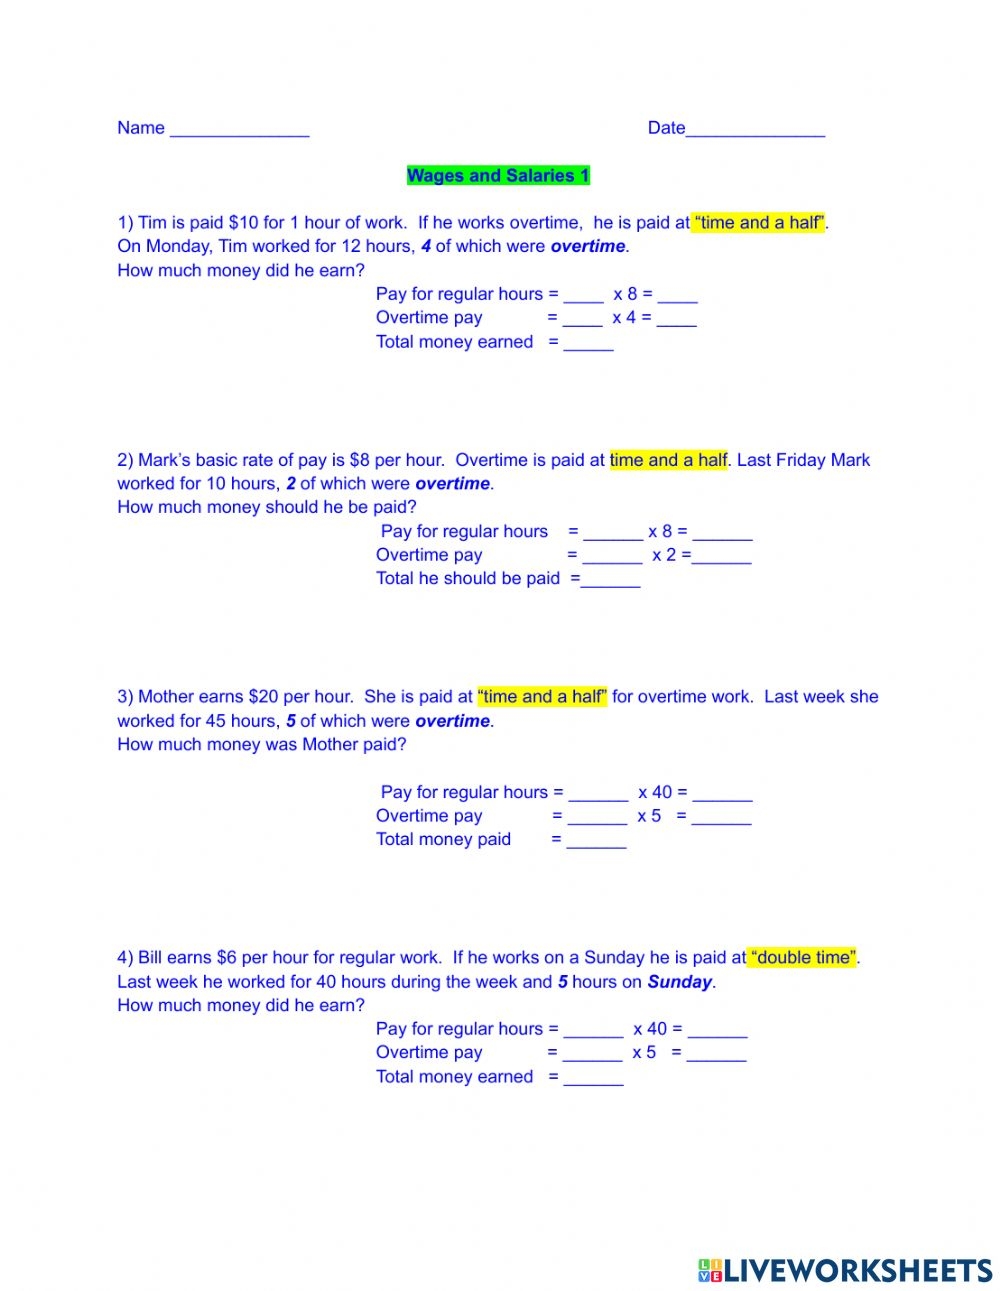 wages-and-salaries-1-worksheet-math-worksheet-answers